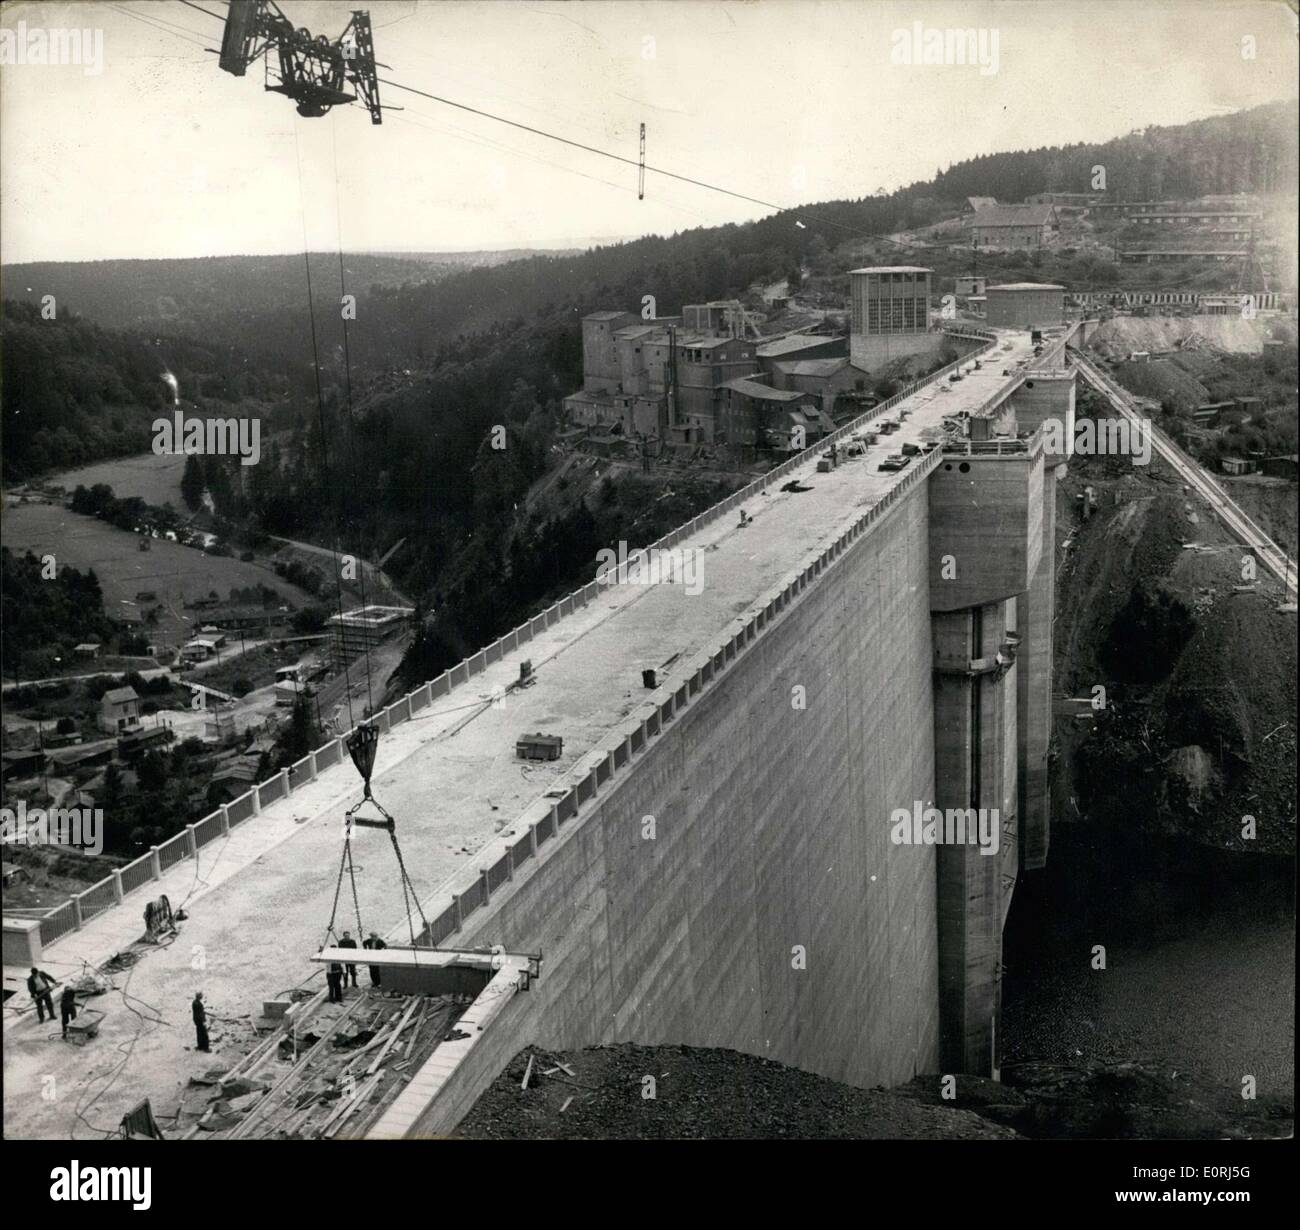 Sep. 30, 1959 - Rappbode Dam is seen here on the fifth anniversary of the founding of East Germany. Pictured: The upstream side Stock Photo